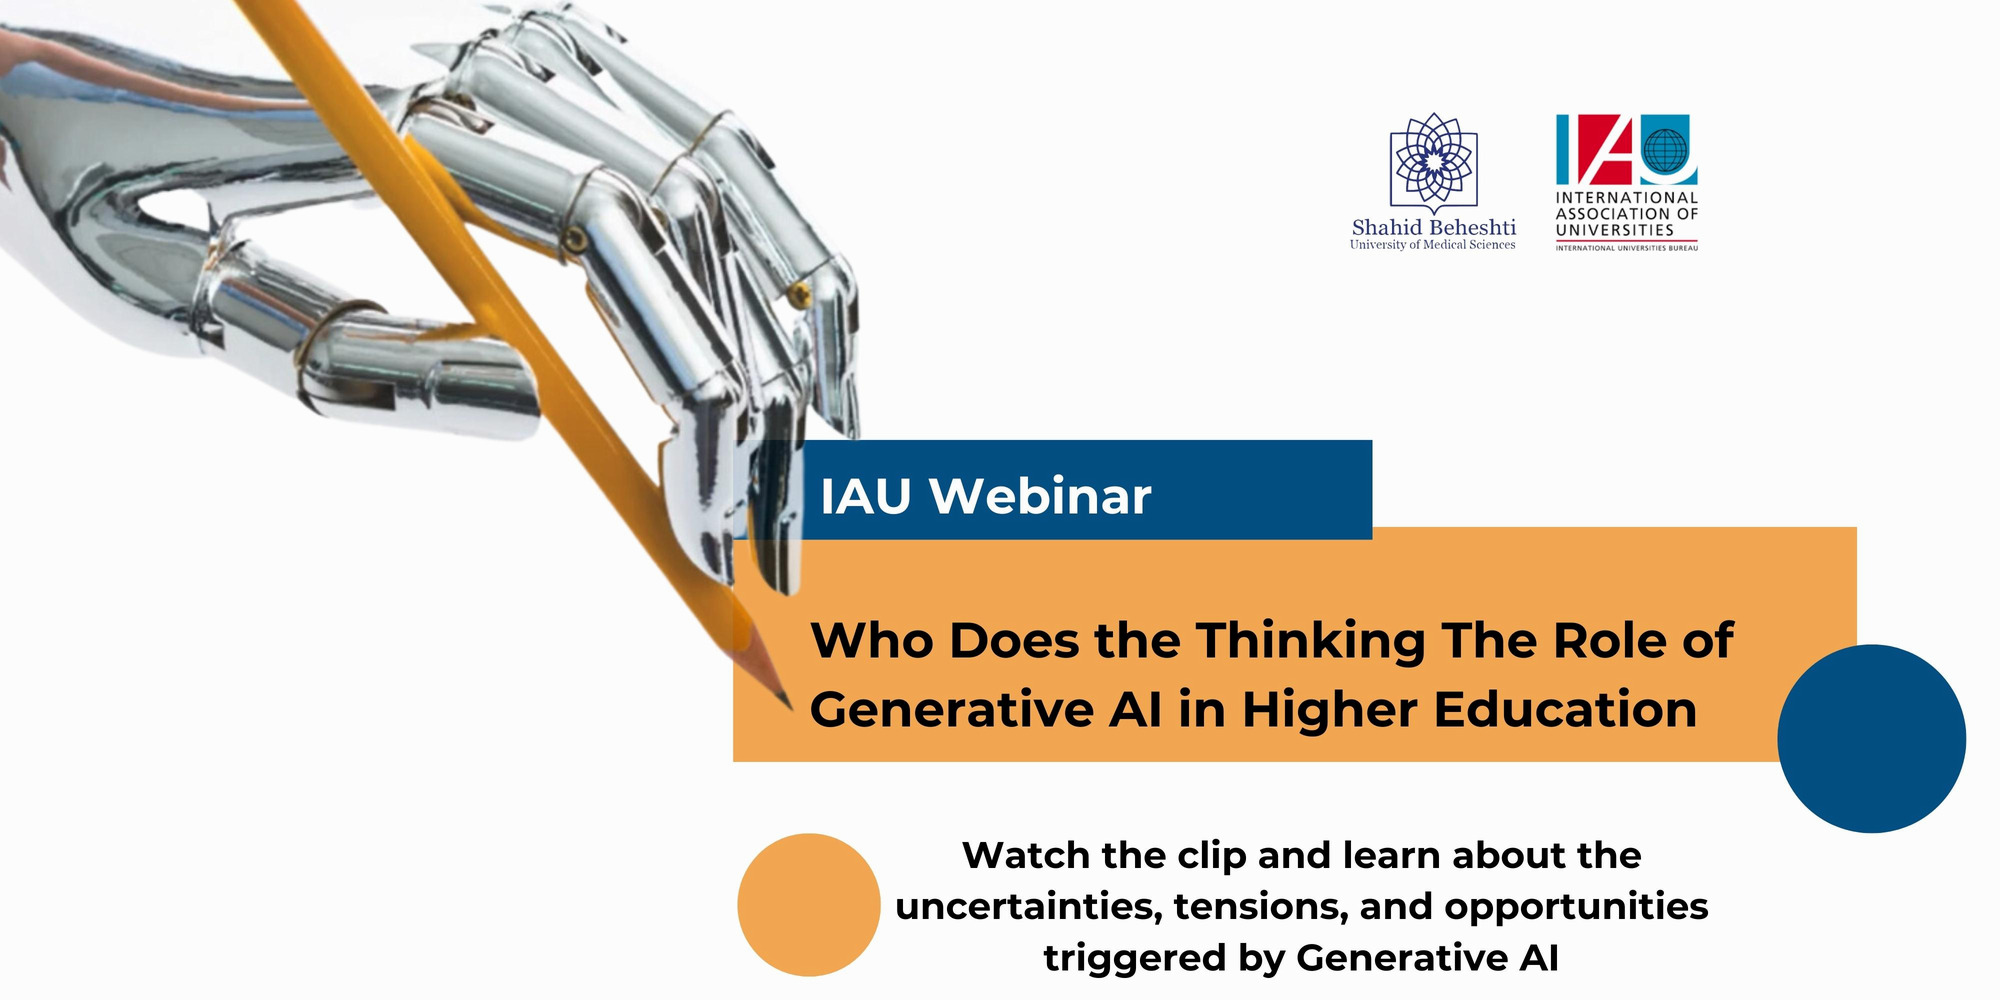 Who Does the Thinking The Role of Generative AI in Higher Education